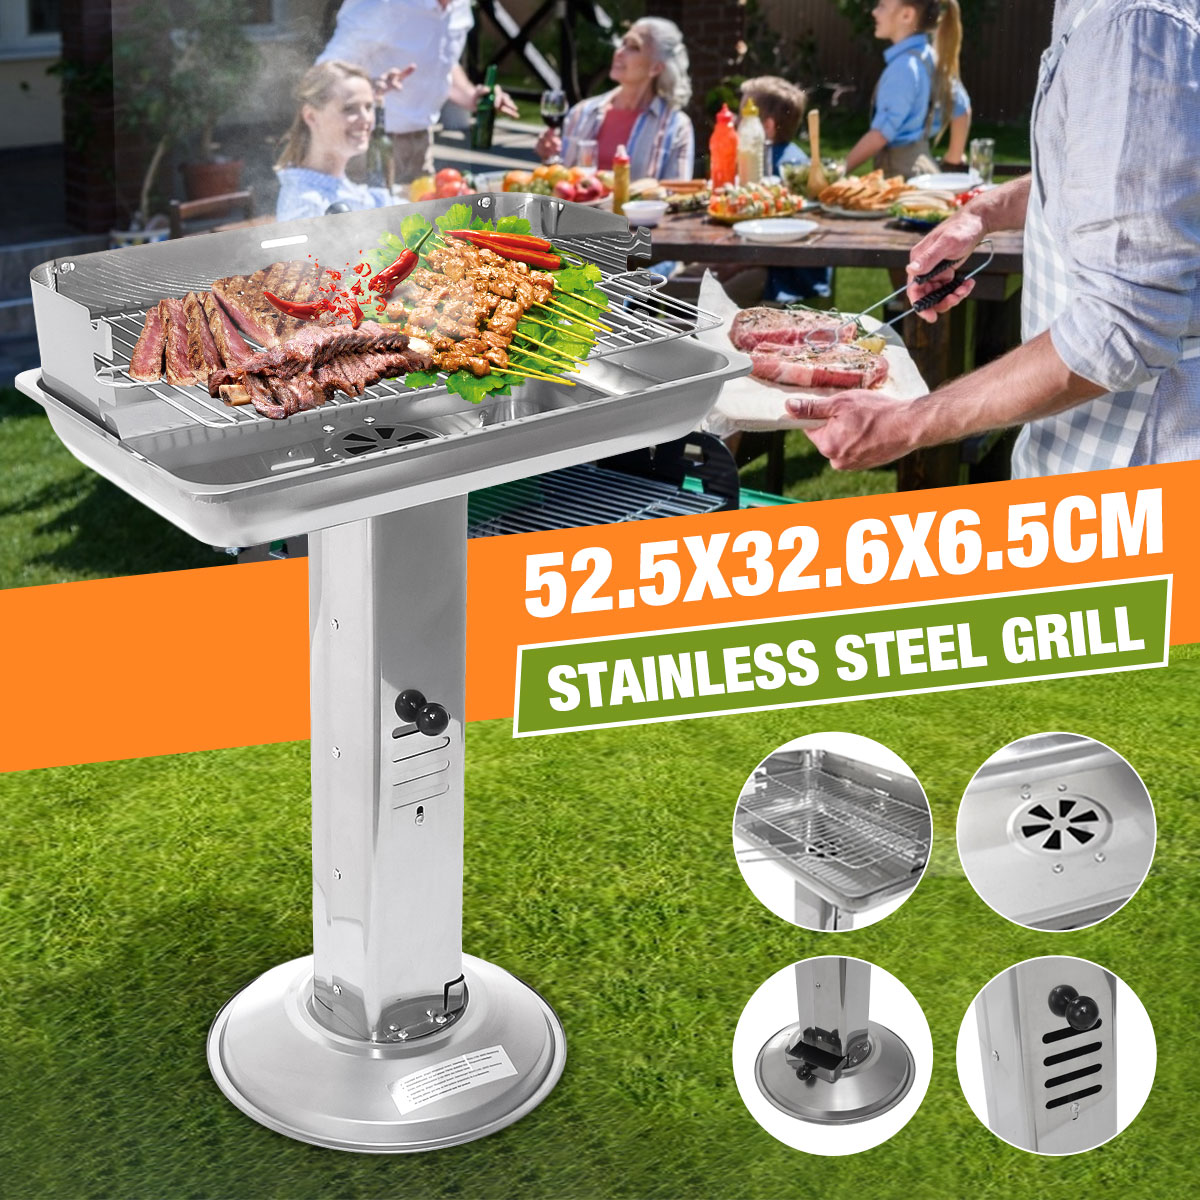 Stainless-Steel-Charcoal-BBQ-Grill-Barbecue-Cooking-Tool-Outdoor-Camping-Picnic-1753368